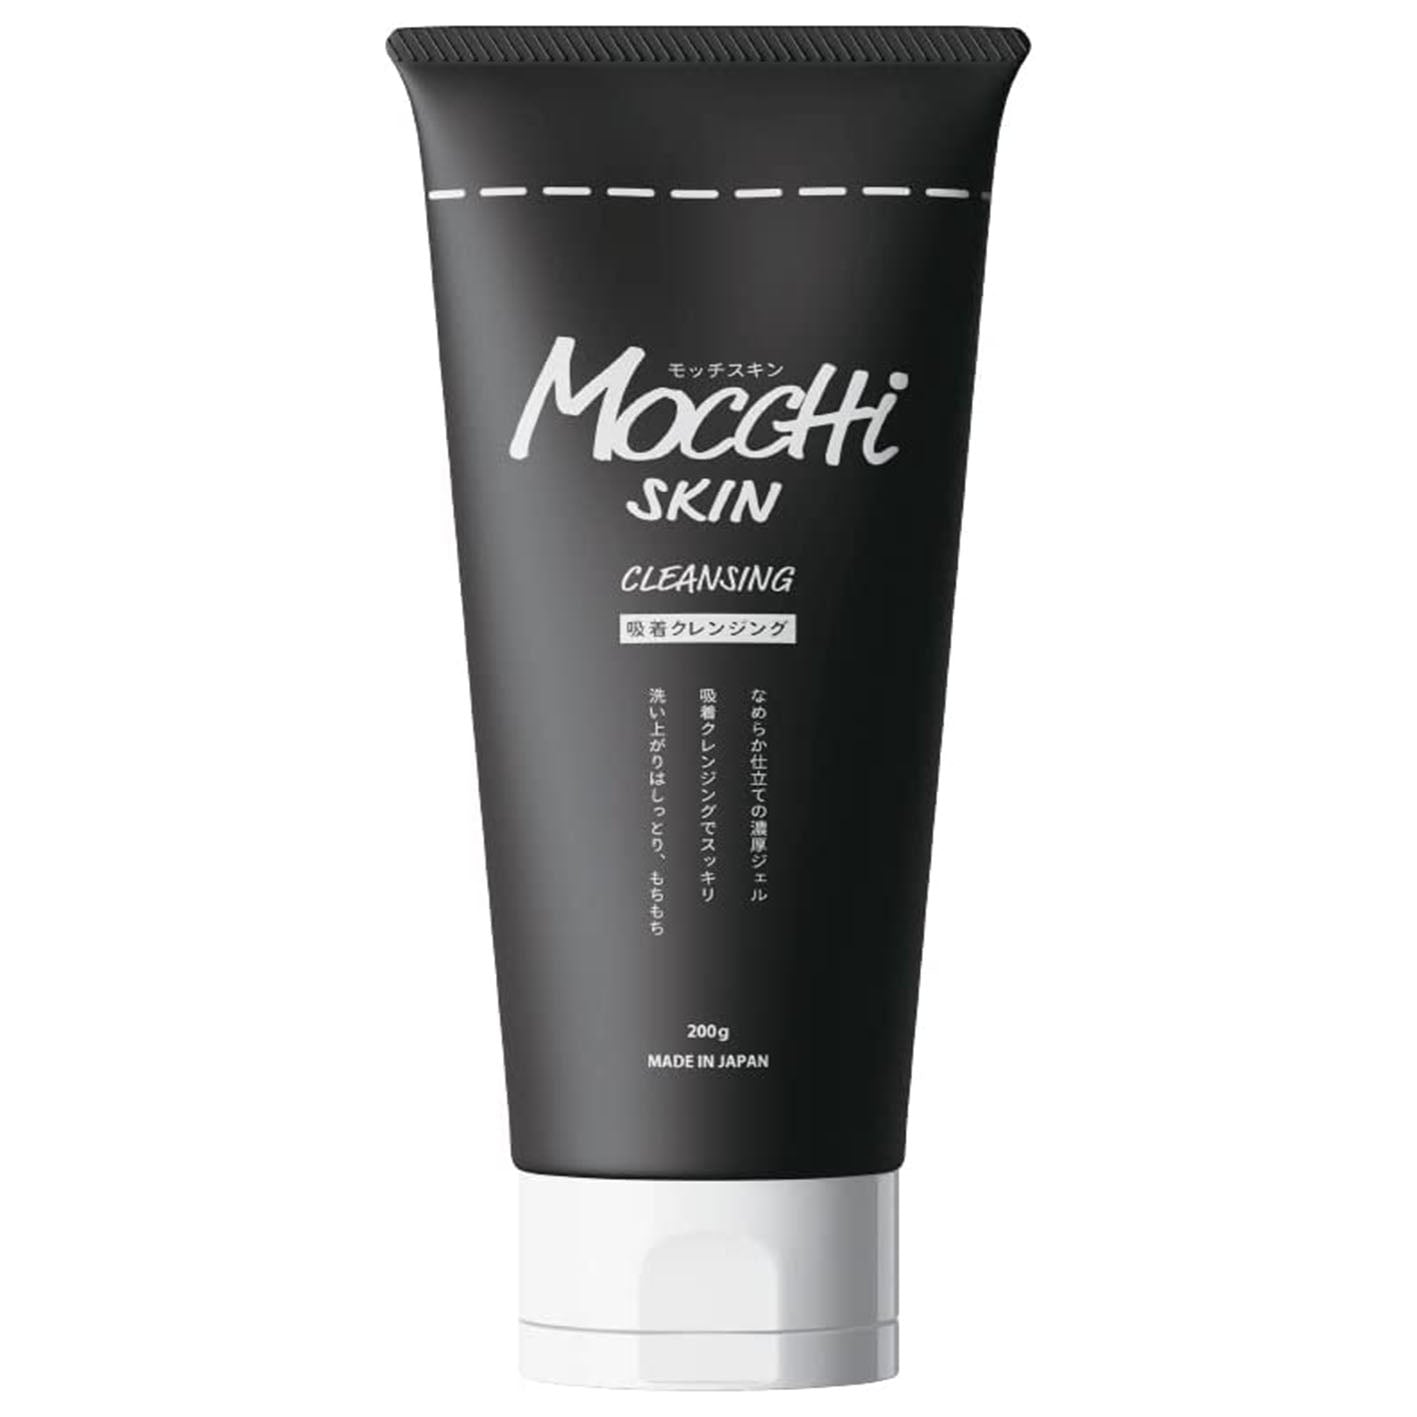 MoccHi SKIN Adsorption Cleansing 200g - Charcoal - Harajuku Culture Japan - Japanease Products Store Beauty and Stationery